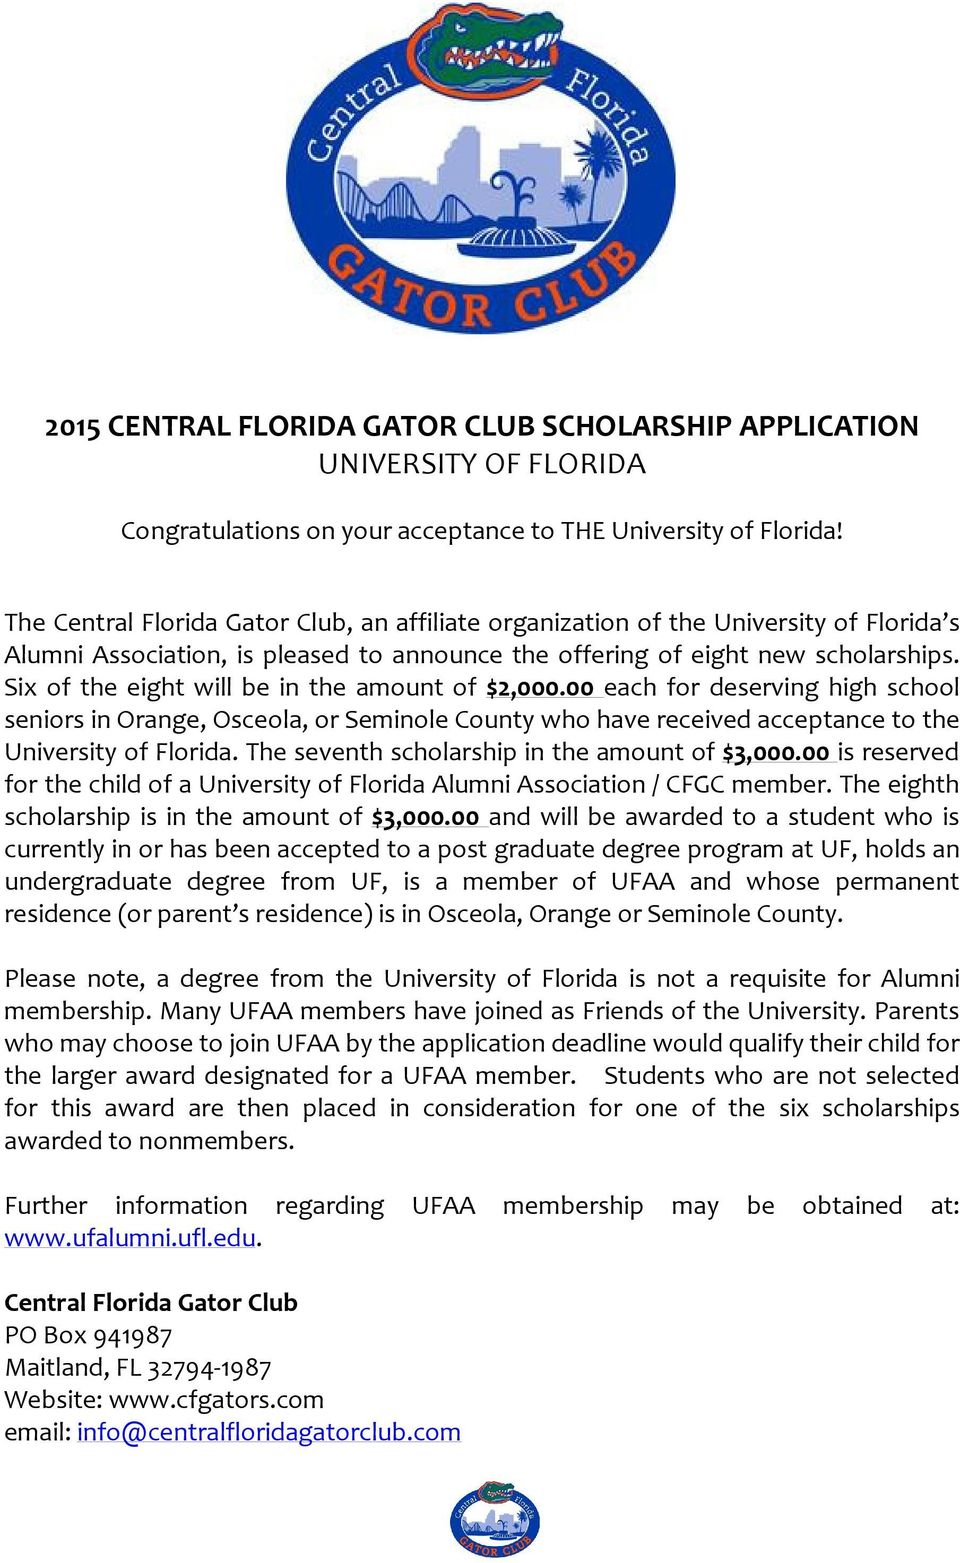 Six of the eight will be in the amount of $2,000.00 each for deserving high school seniors in Orange, Osceola, or Seminole County who have received acceptance to the University of Florida.